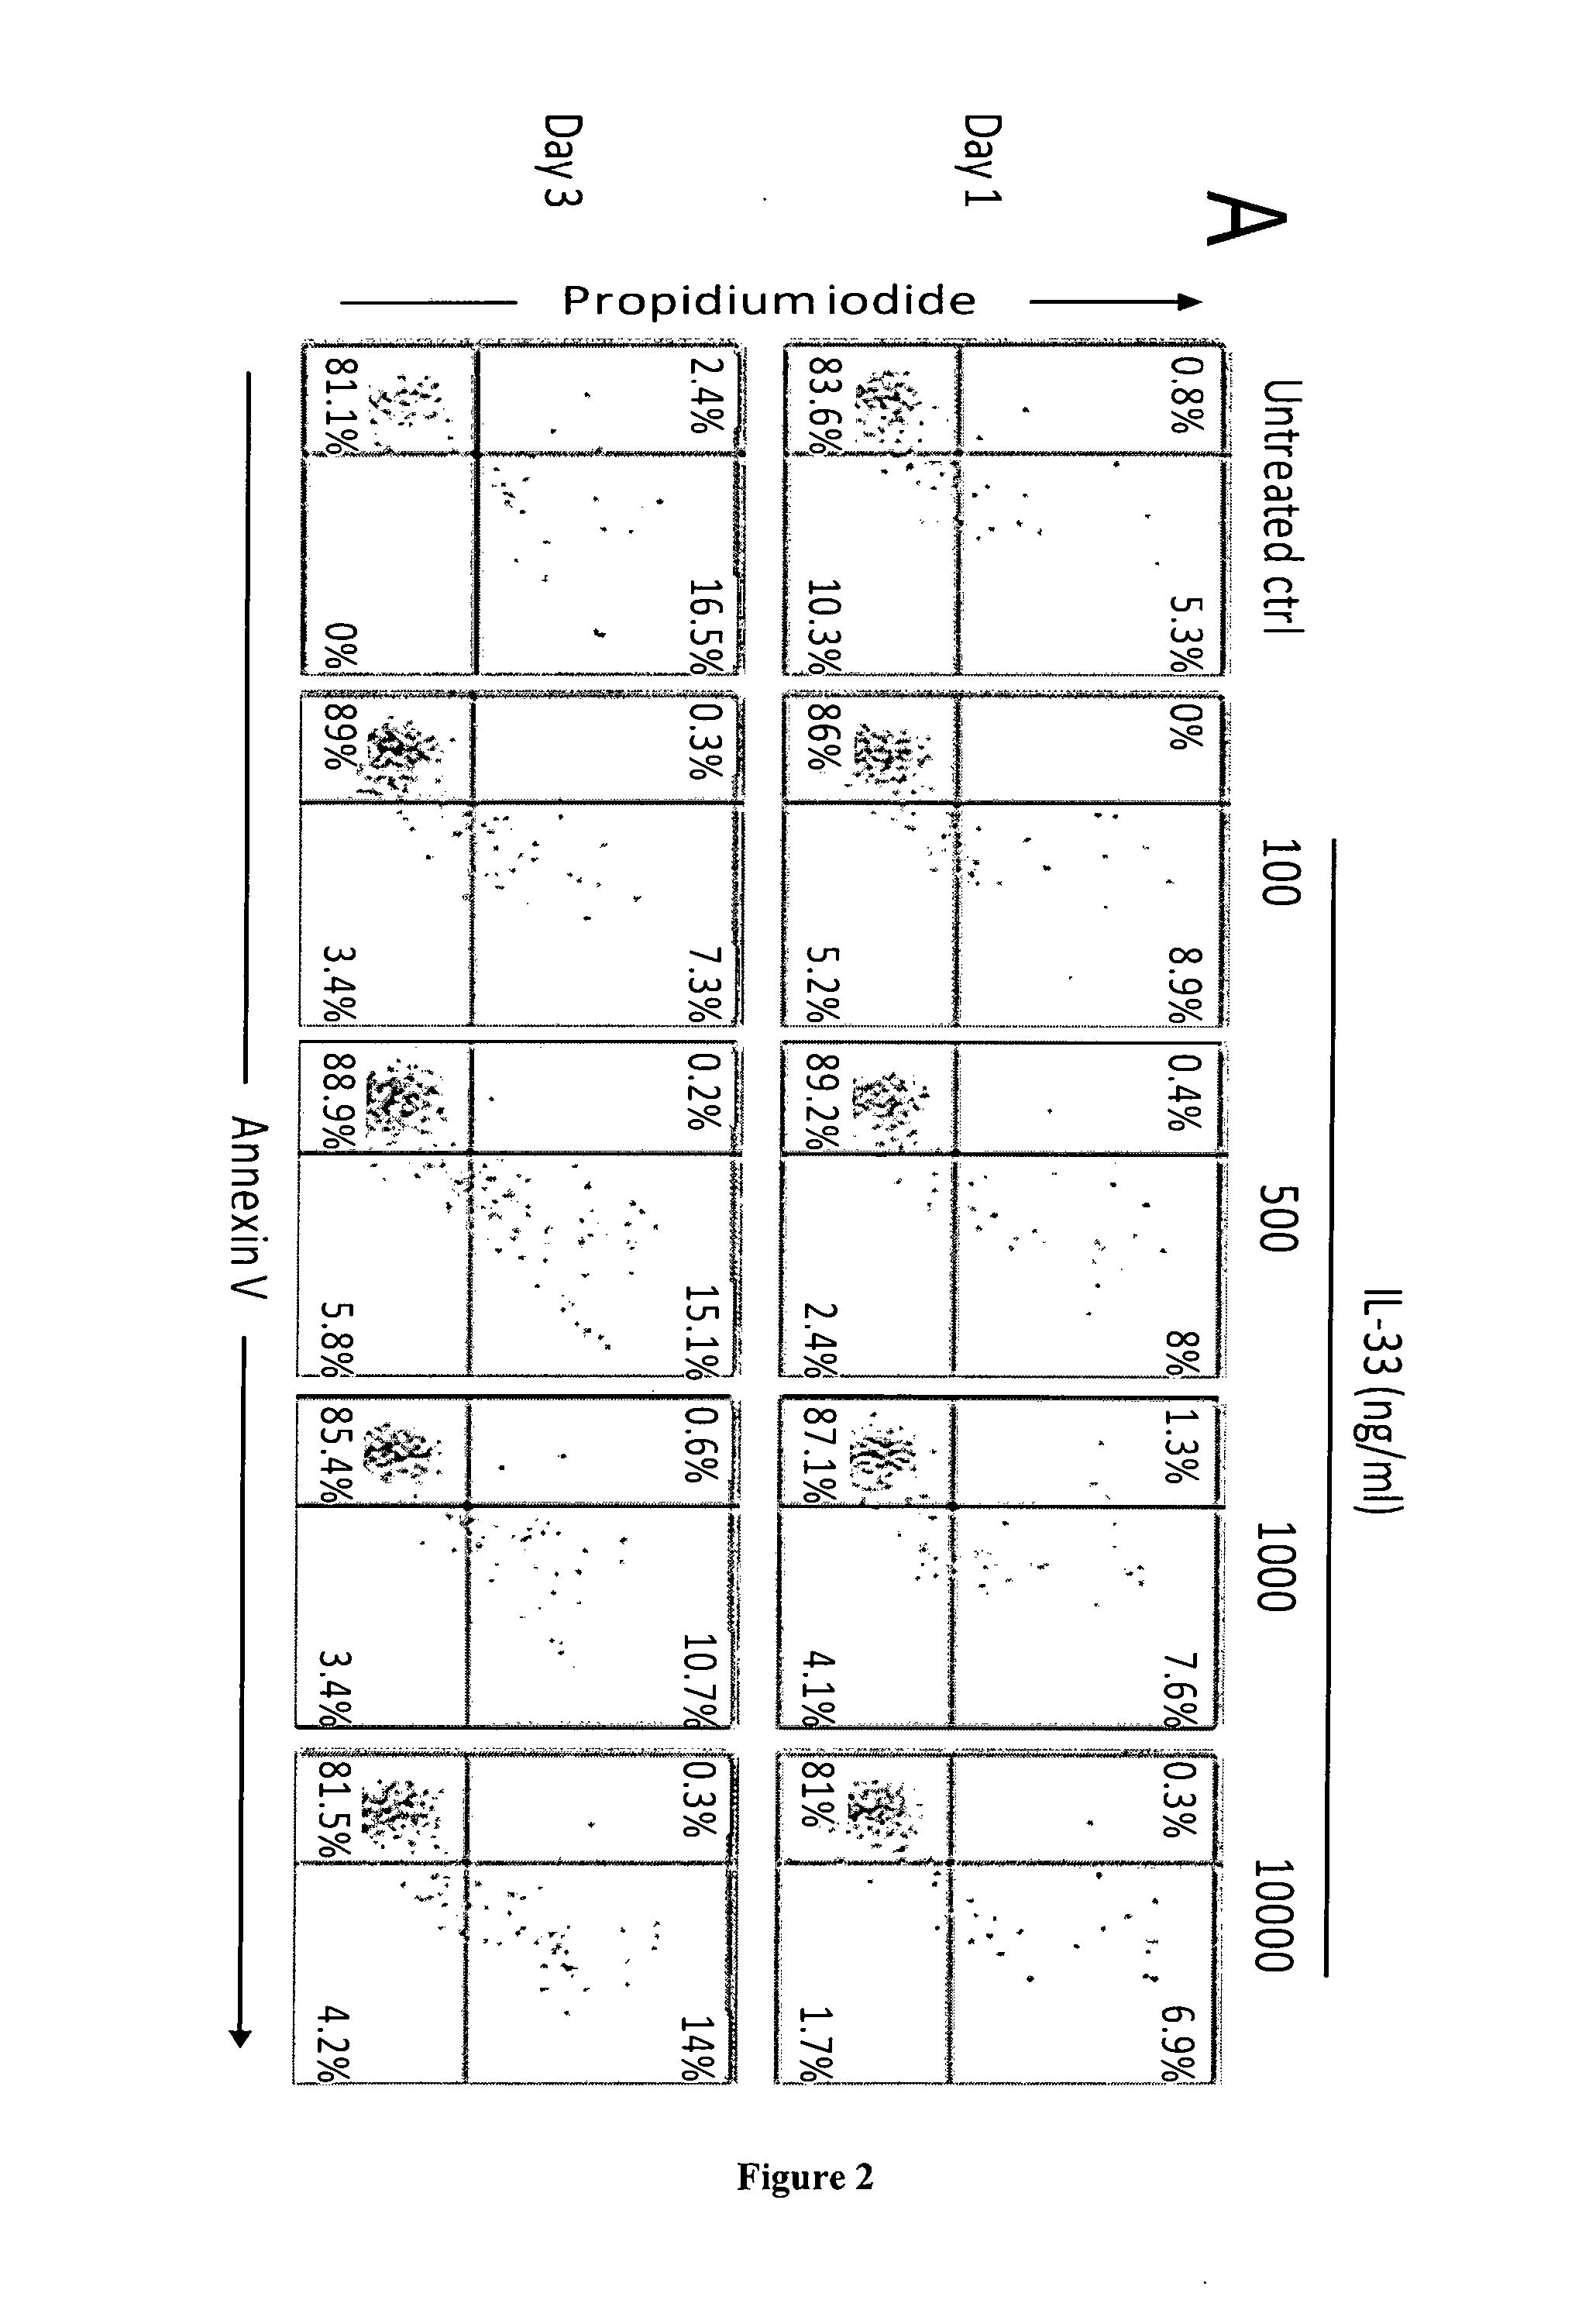 Method for inducing il-2-free proliferation of gamma delta t cells